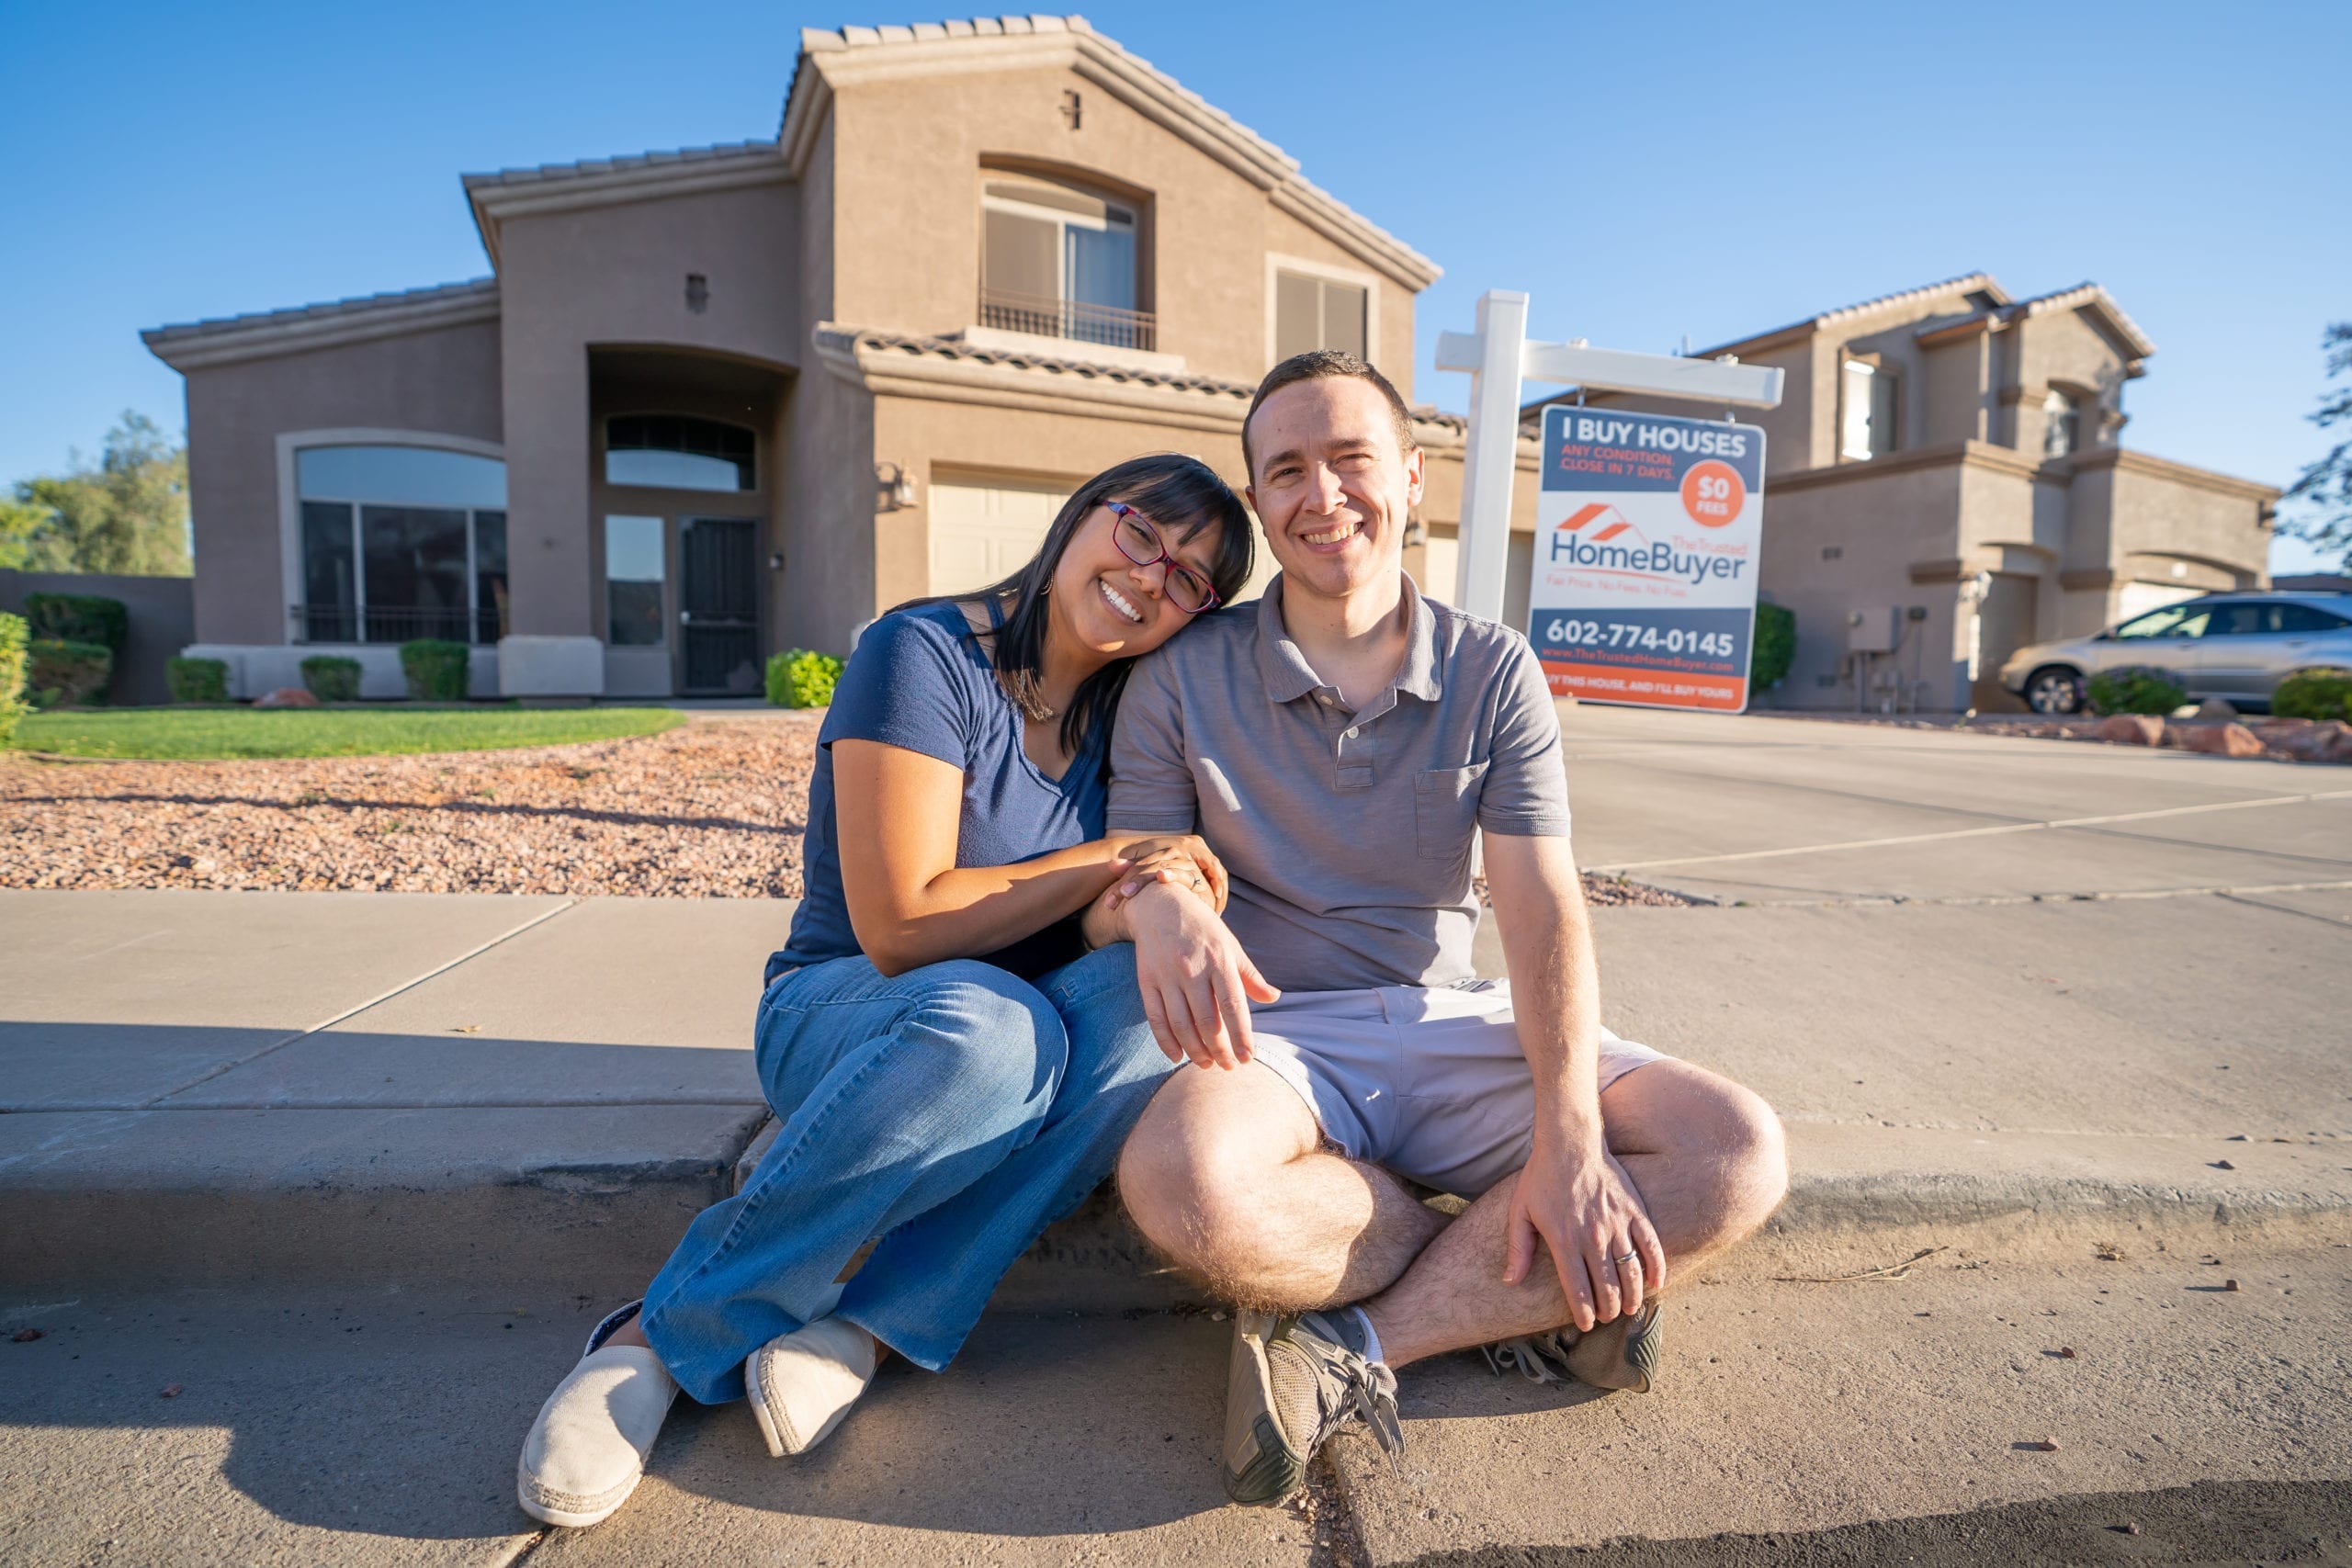 a man and woman sitting on a curb with a building in the background